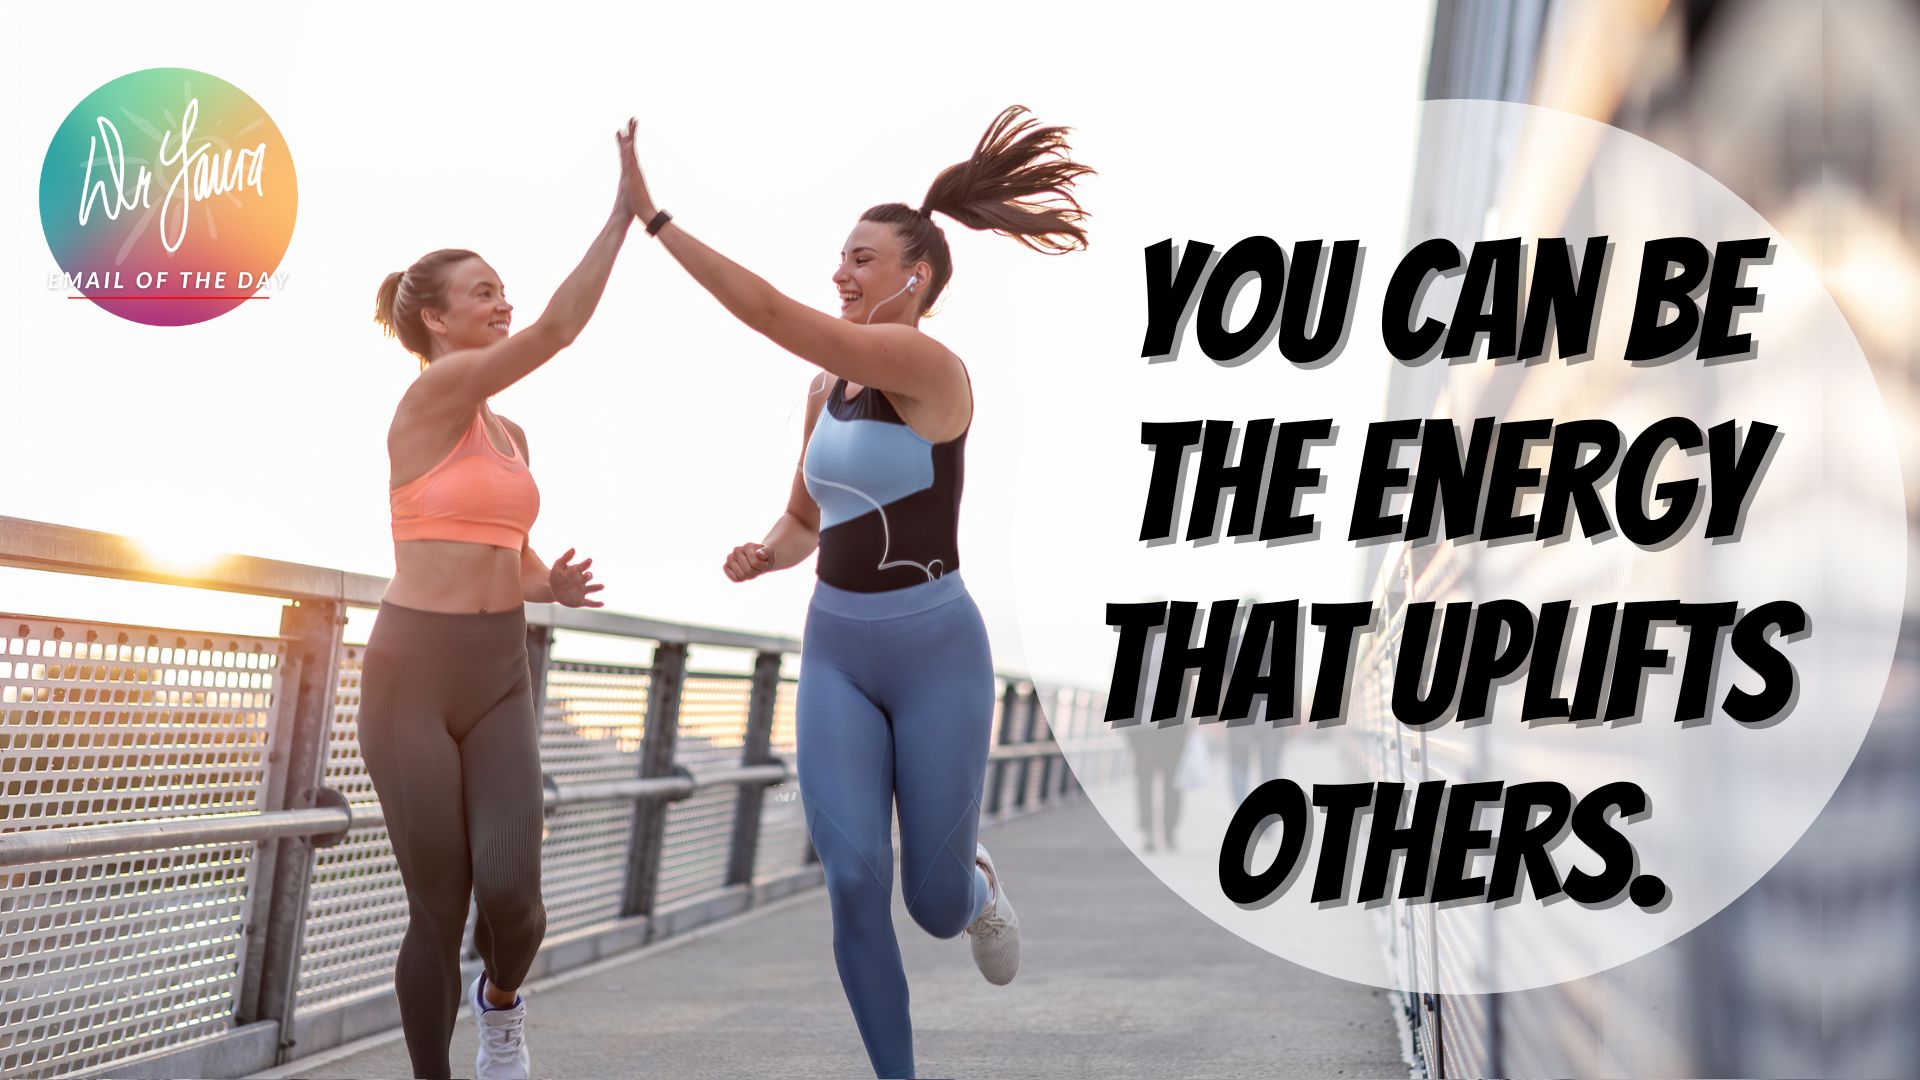 Email of the Day: You Were My Running Buddy